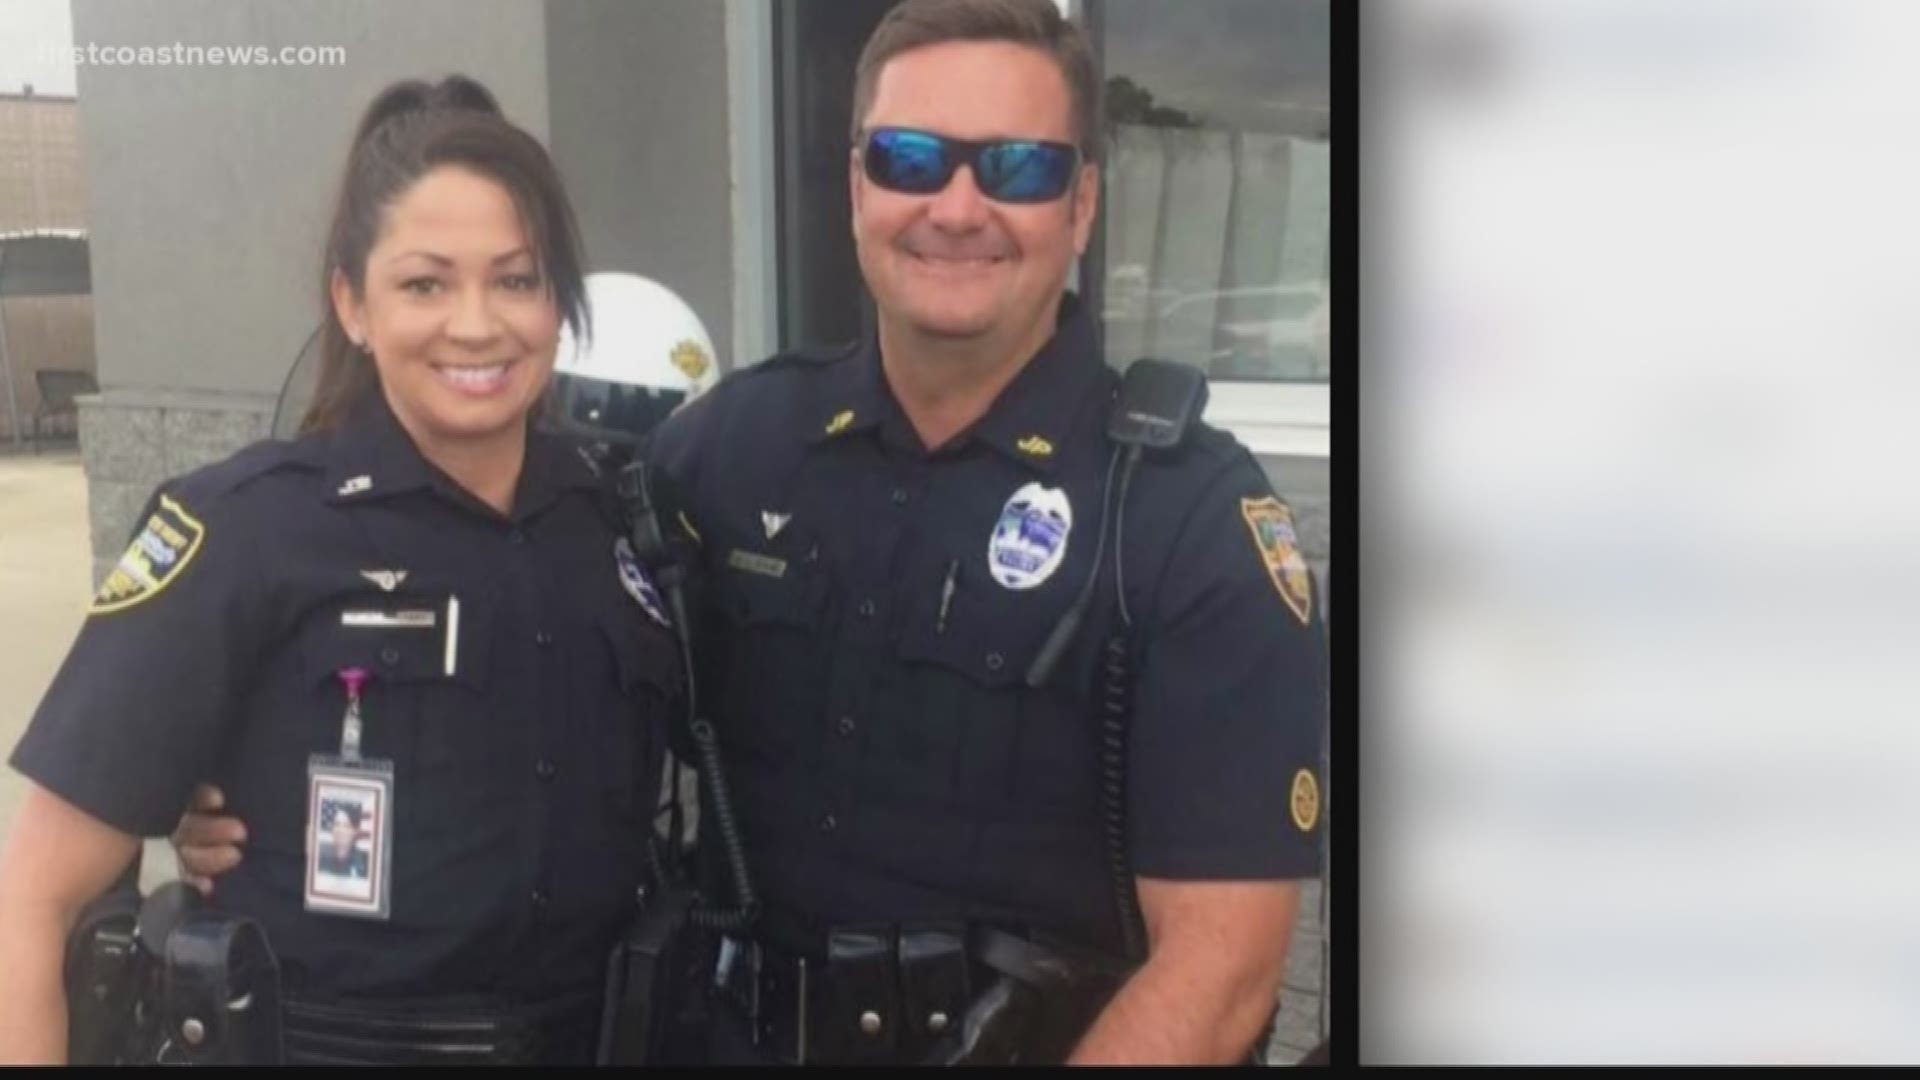 JSO bailiff Cathy Adams and her husband, JSO Officer William Adams and their two teenagers were injured in a crash involving a suspected drunk driver on I-95 in St. Johns County.